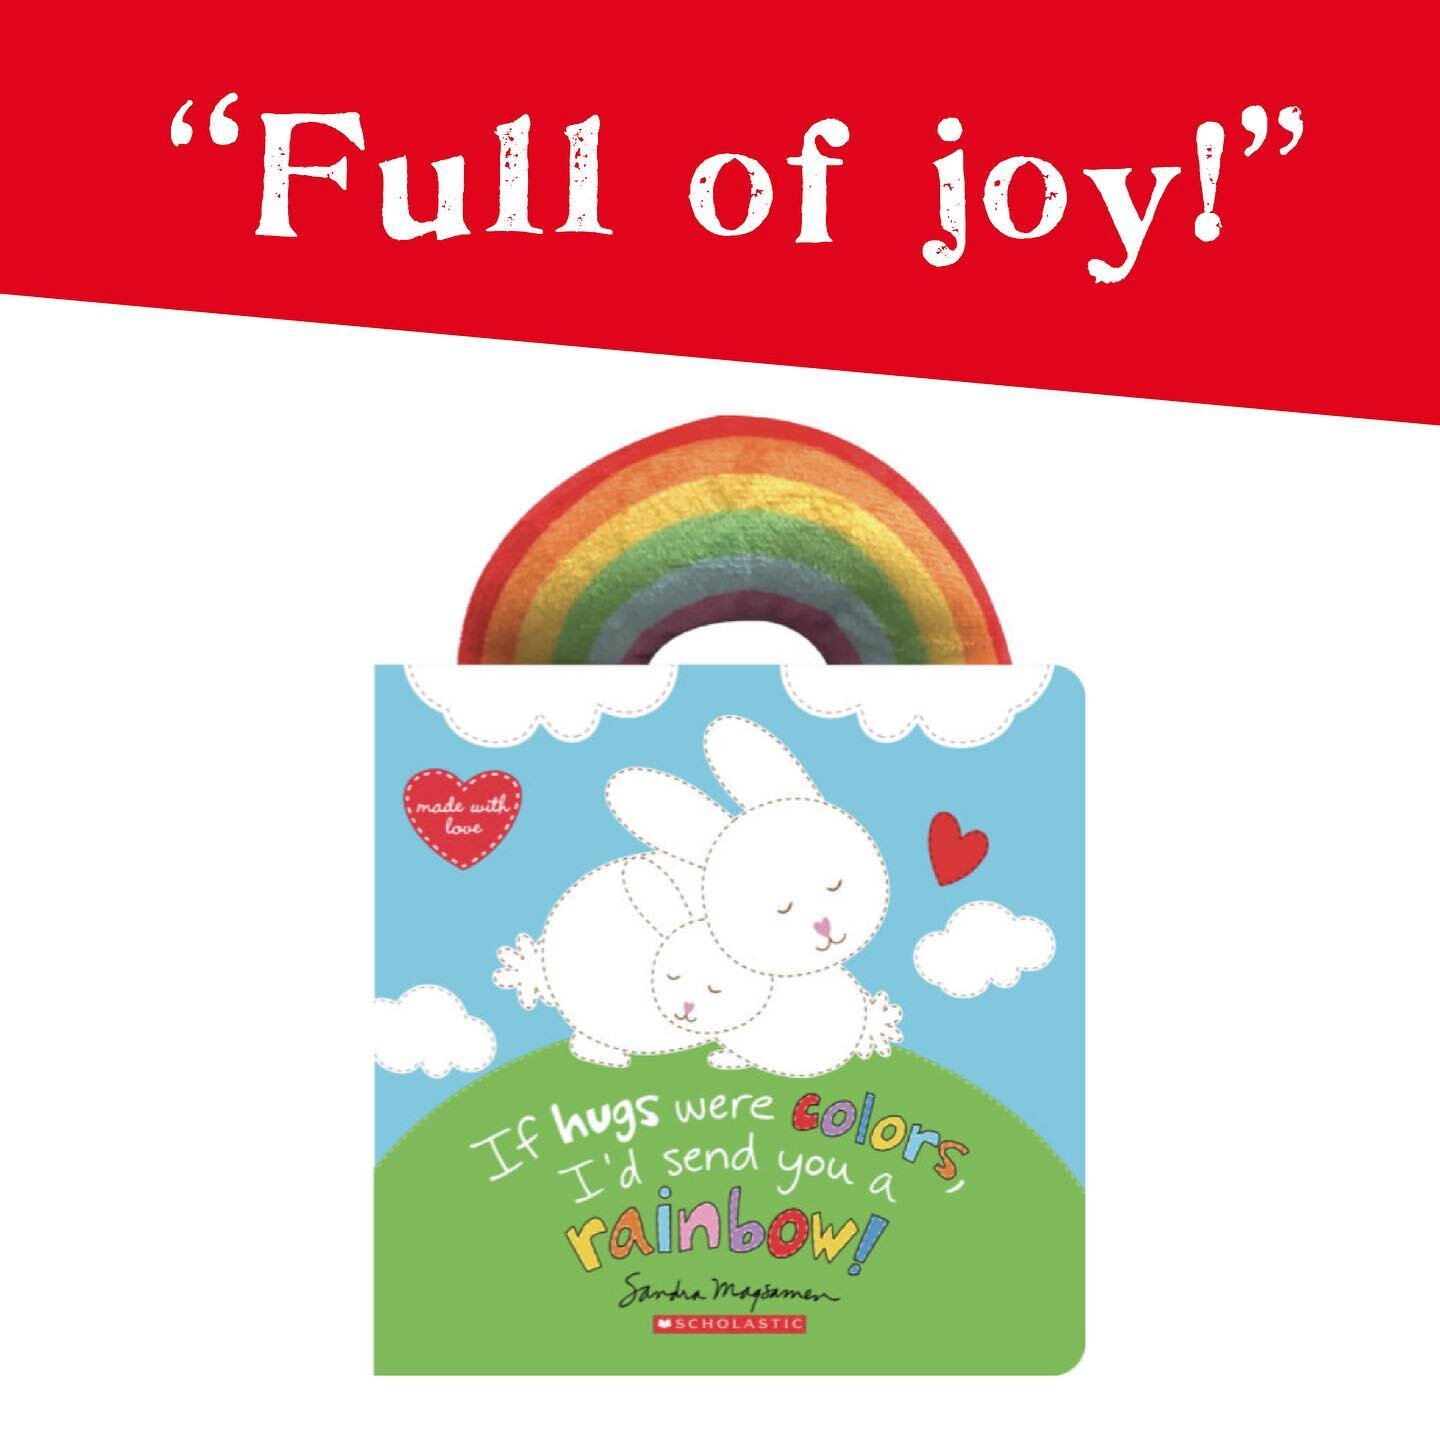 IF HUGS WERE COLORS I&rsquo;D SEND YOU A RAINBOW! 🌈

Shower your little bunnies with encouragement, in this joyful, colorful ode to unending love -- featuring a soft plush rainbow!

Snuggle up with your little ones and this colorful board book fille